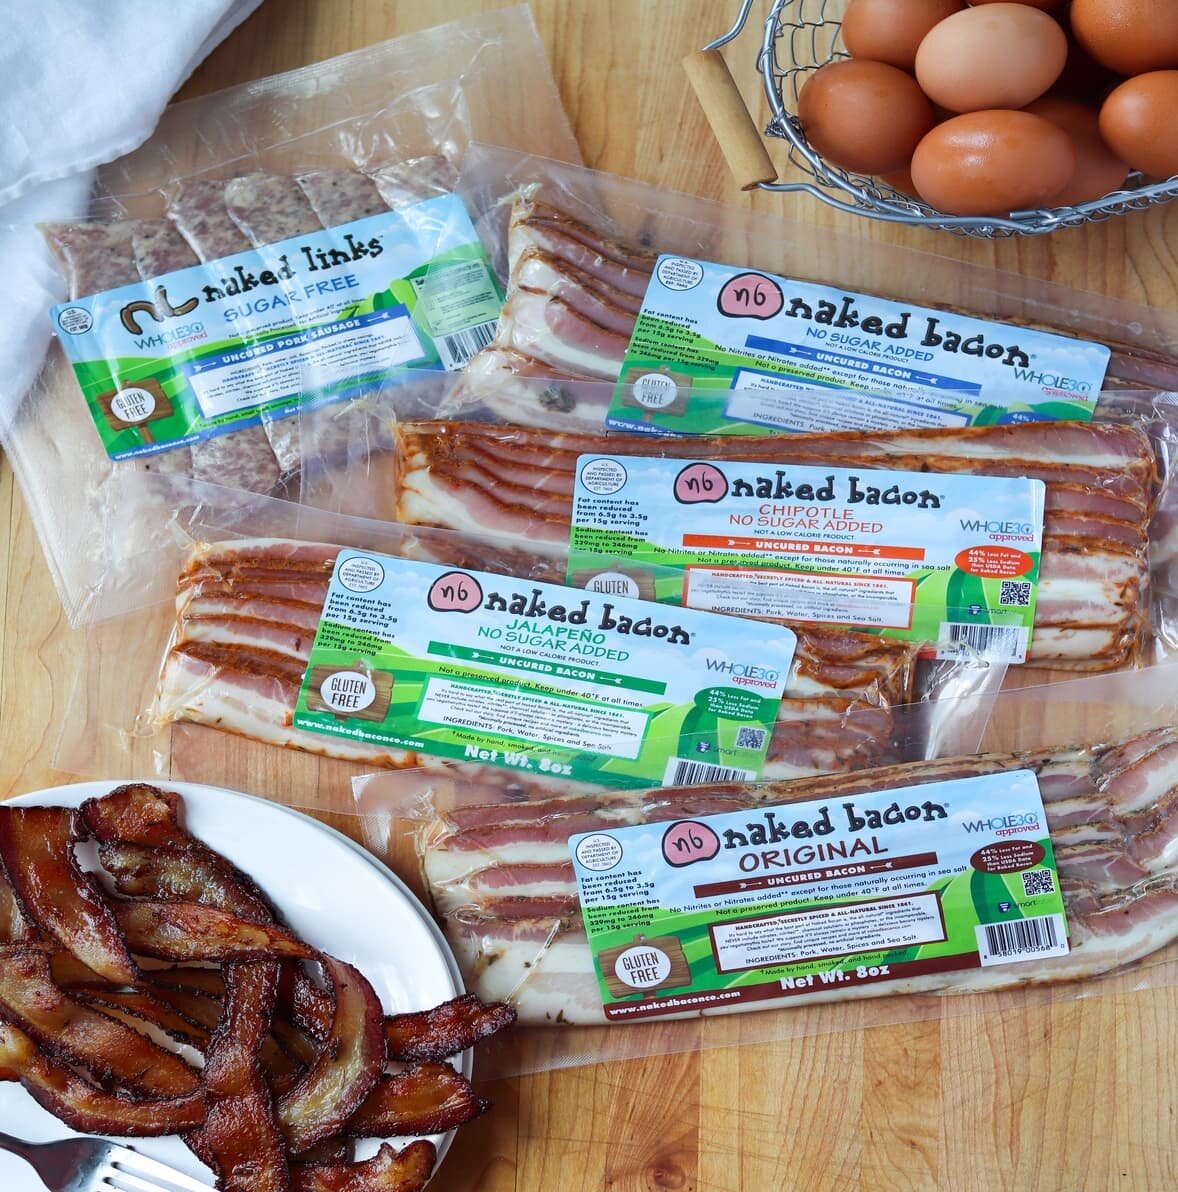 Whole30 Approved Bacon - Naked Bacon.jpg